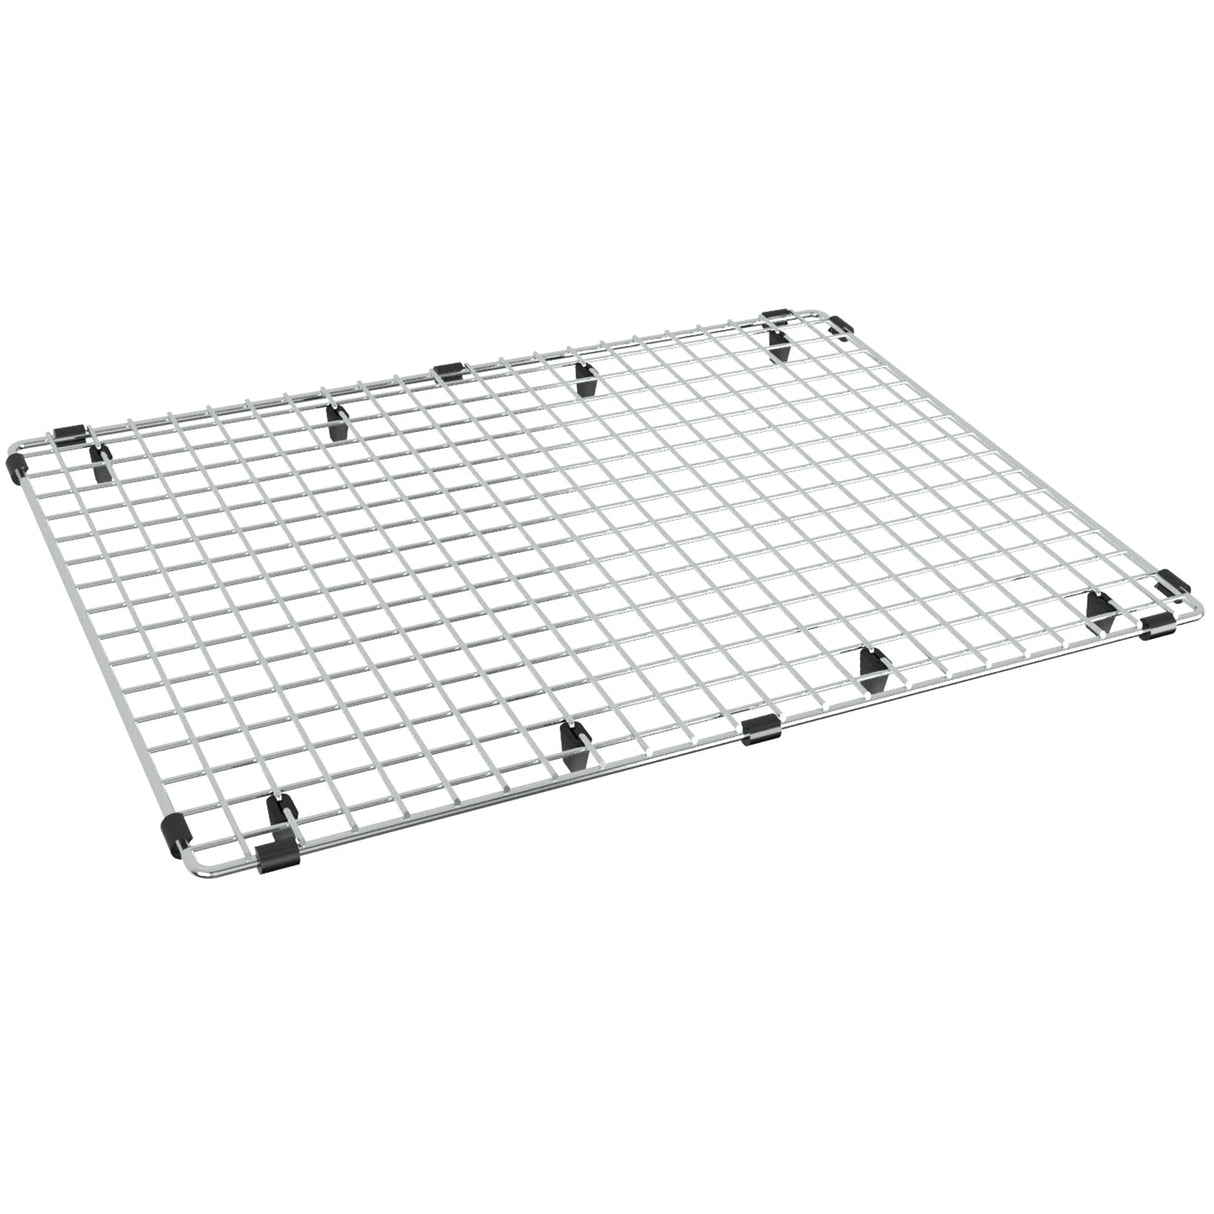 FRANKE CL-31-36S 22.8-in. x 16.1-in. Stainless Steel Bottom Sink Grid for Crystal CLV110-31 Sink In Stainless